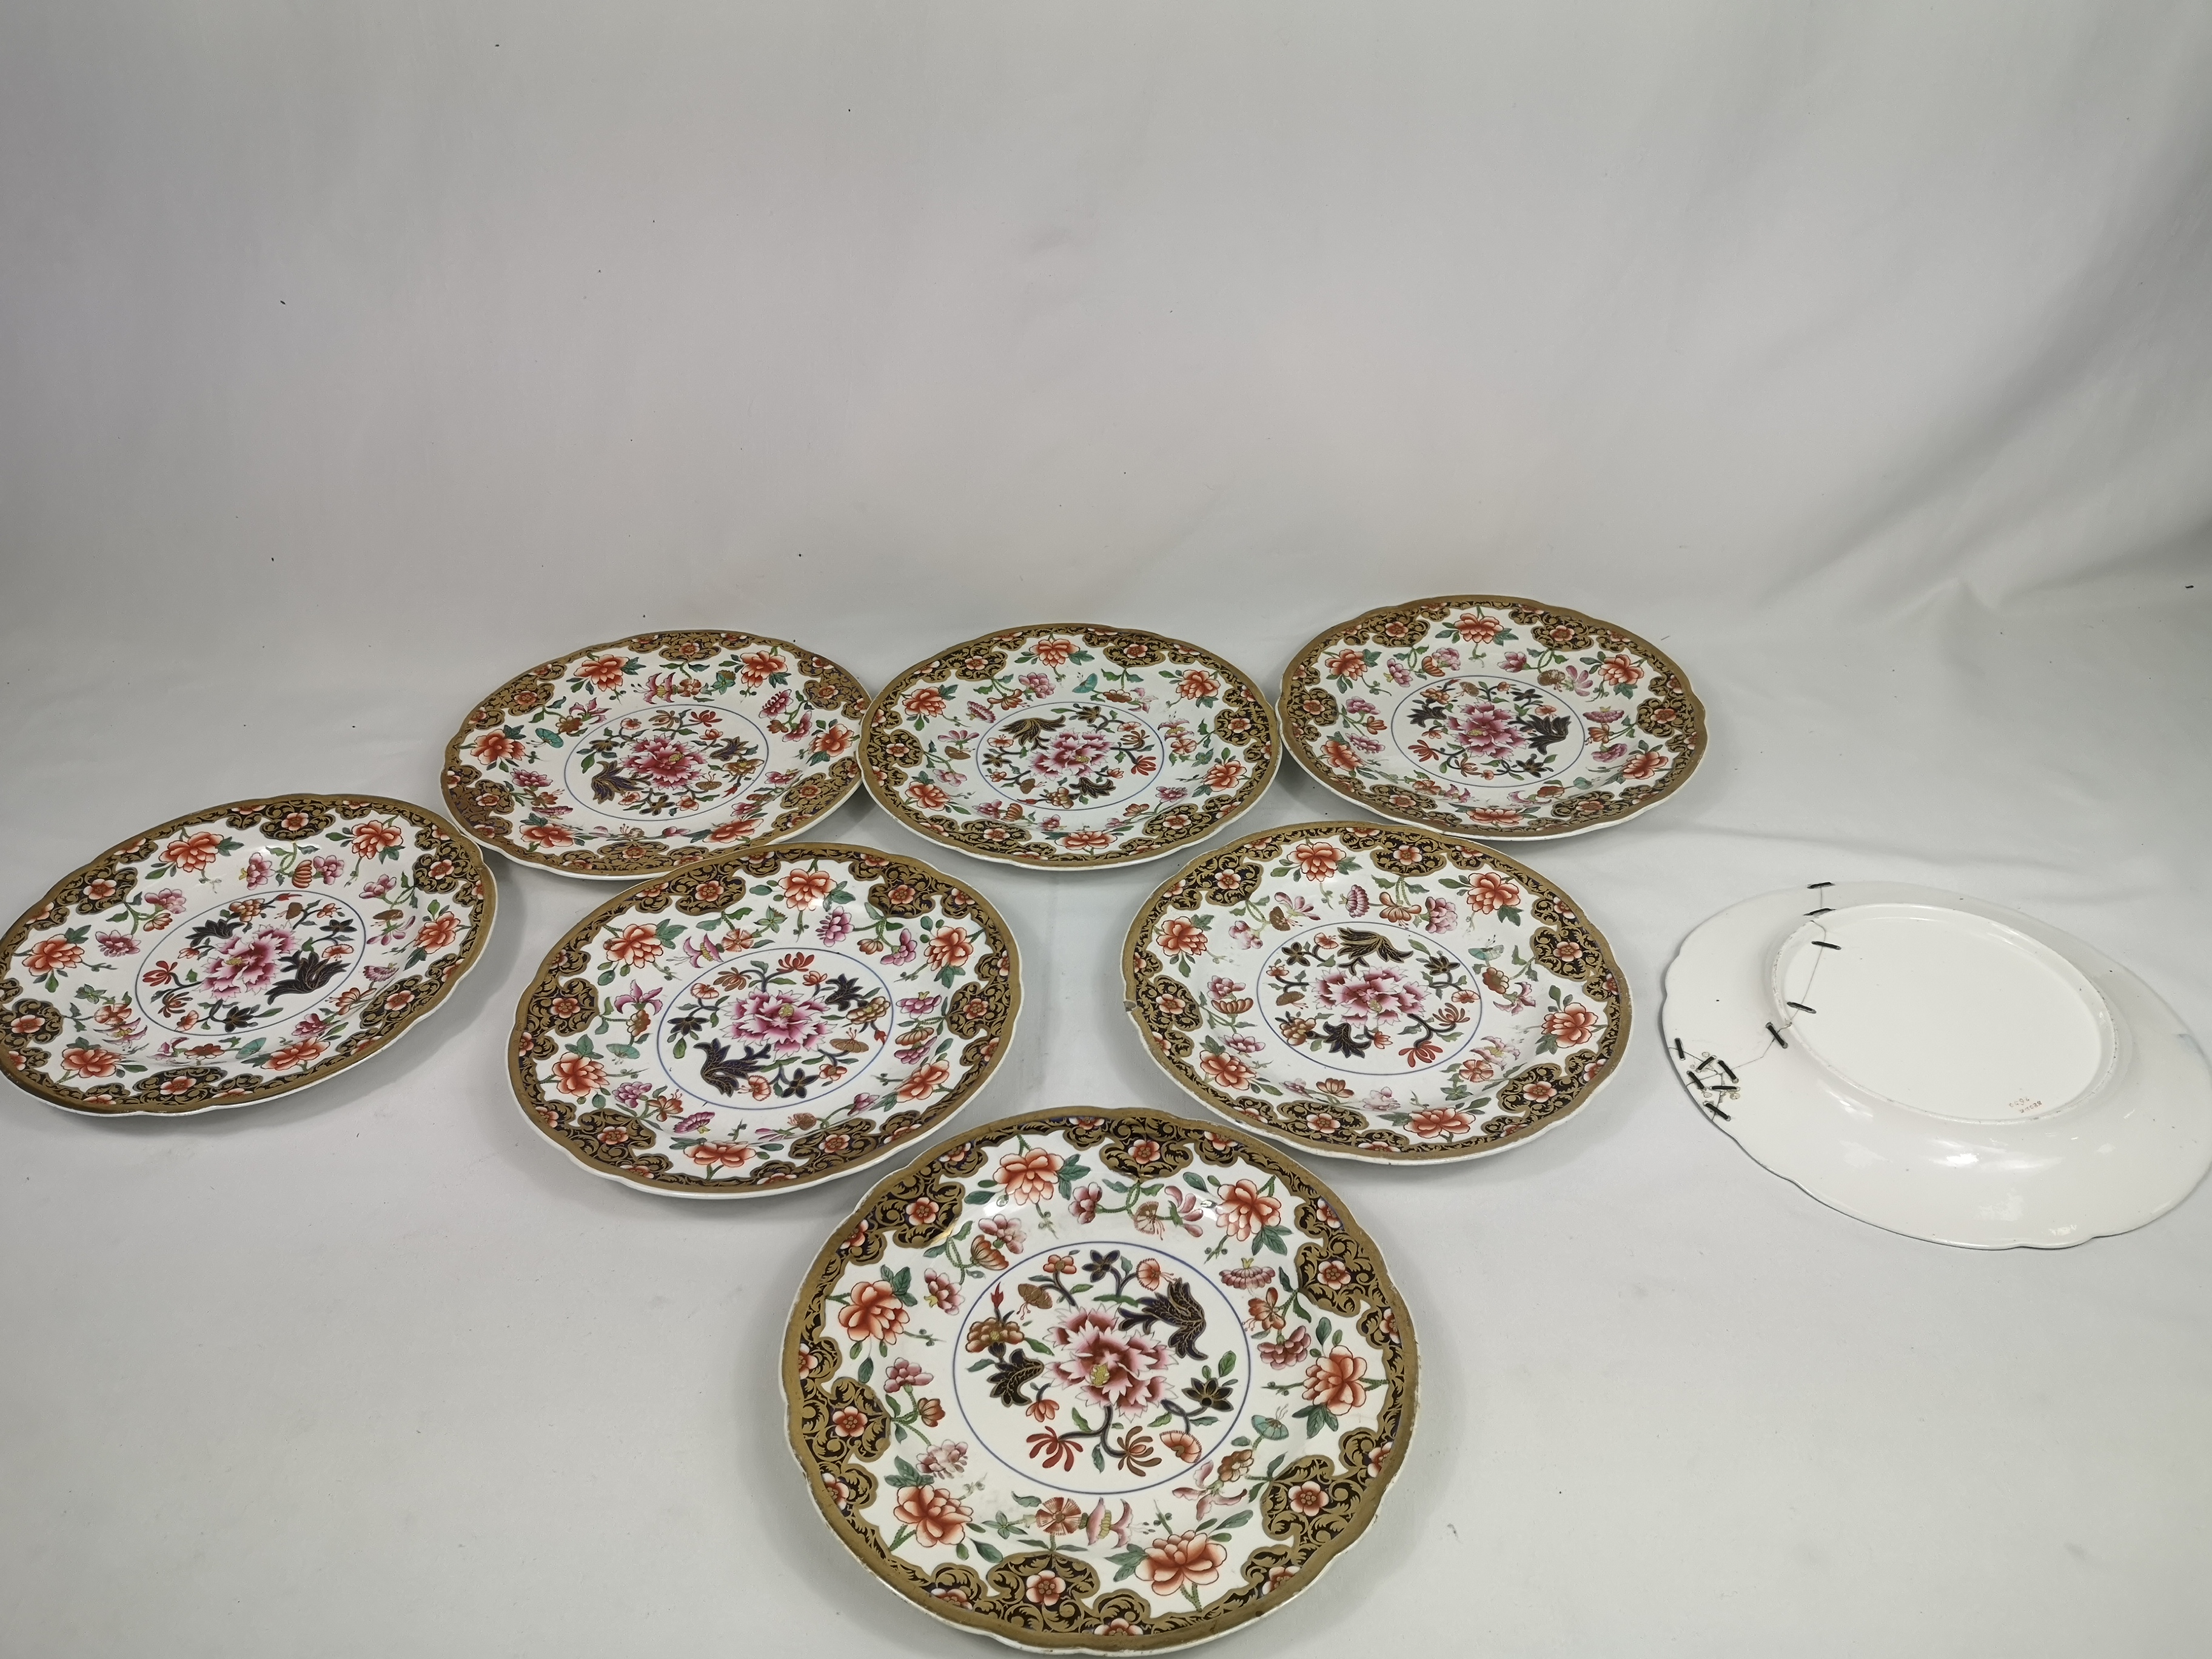 Eight 19th century Spode plates - Image 4 of 4